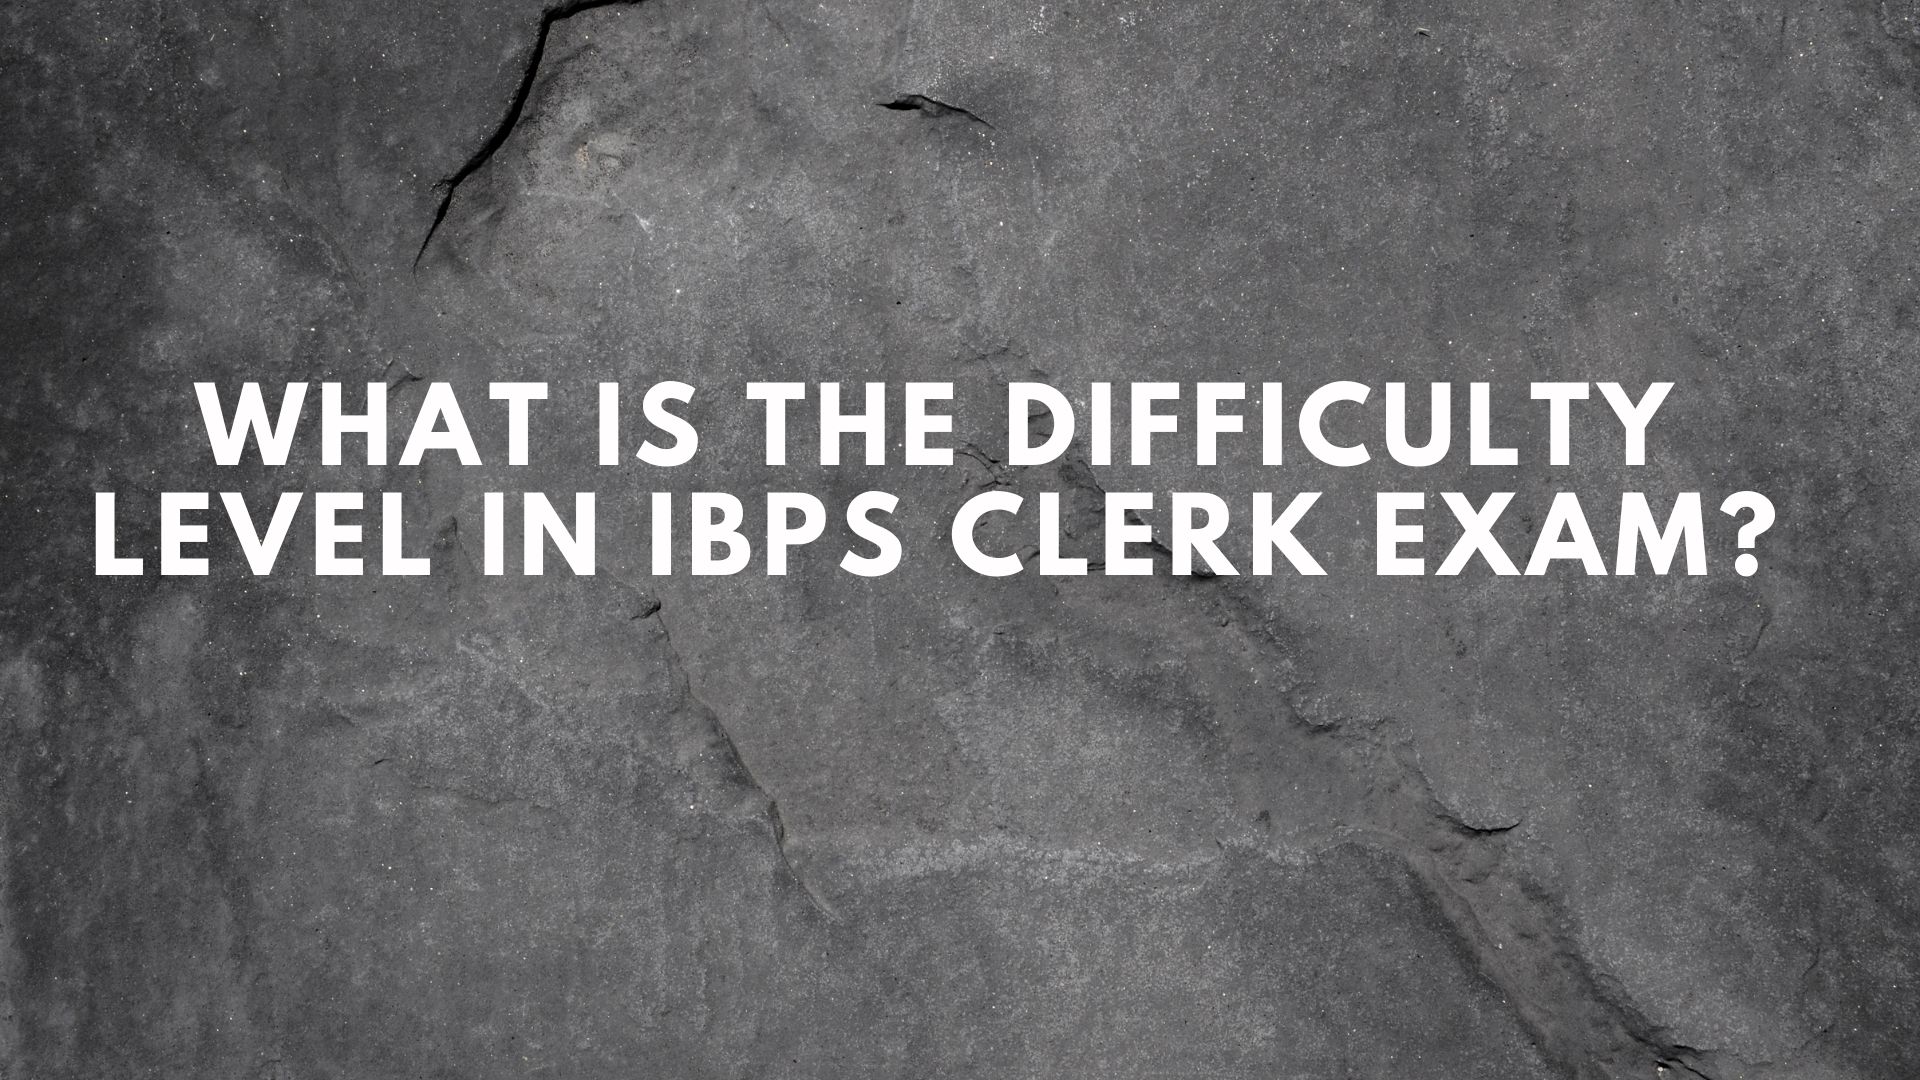 What is the Difficulty level in IBPS Clerk Exam